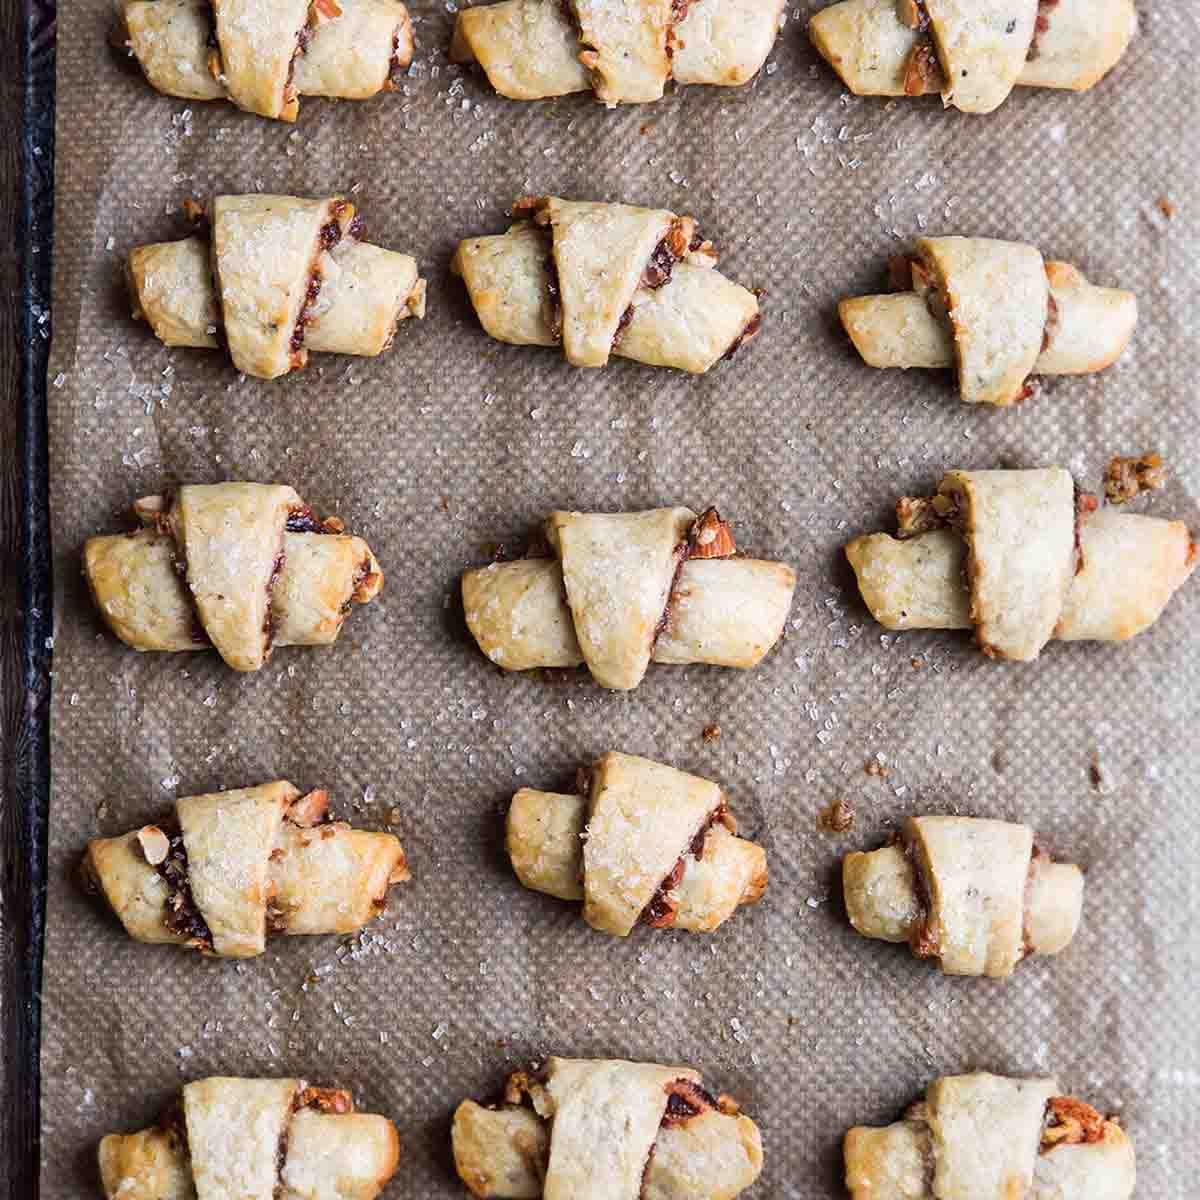 A baking sheet with four rows of baked fig rugelach.